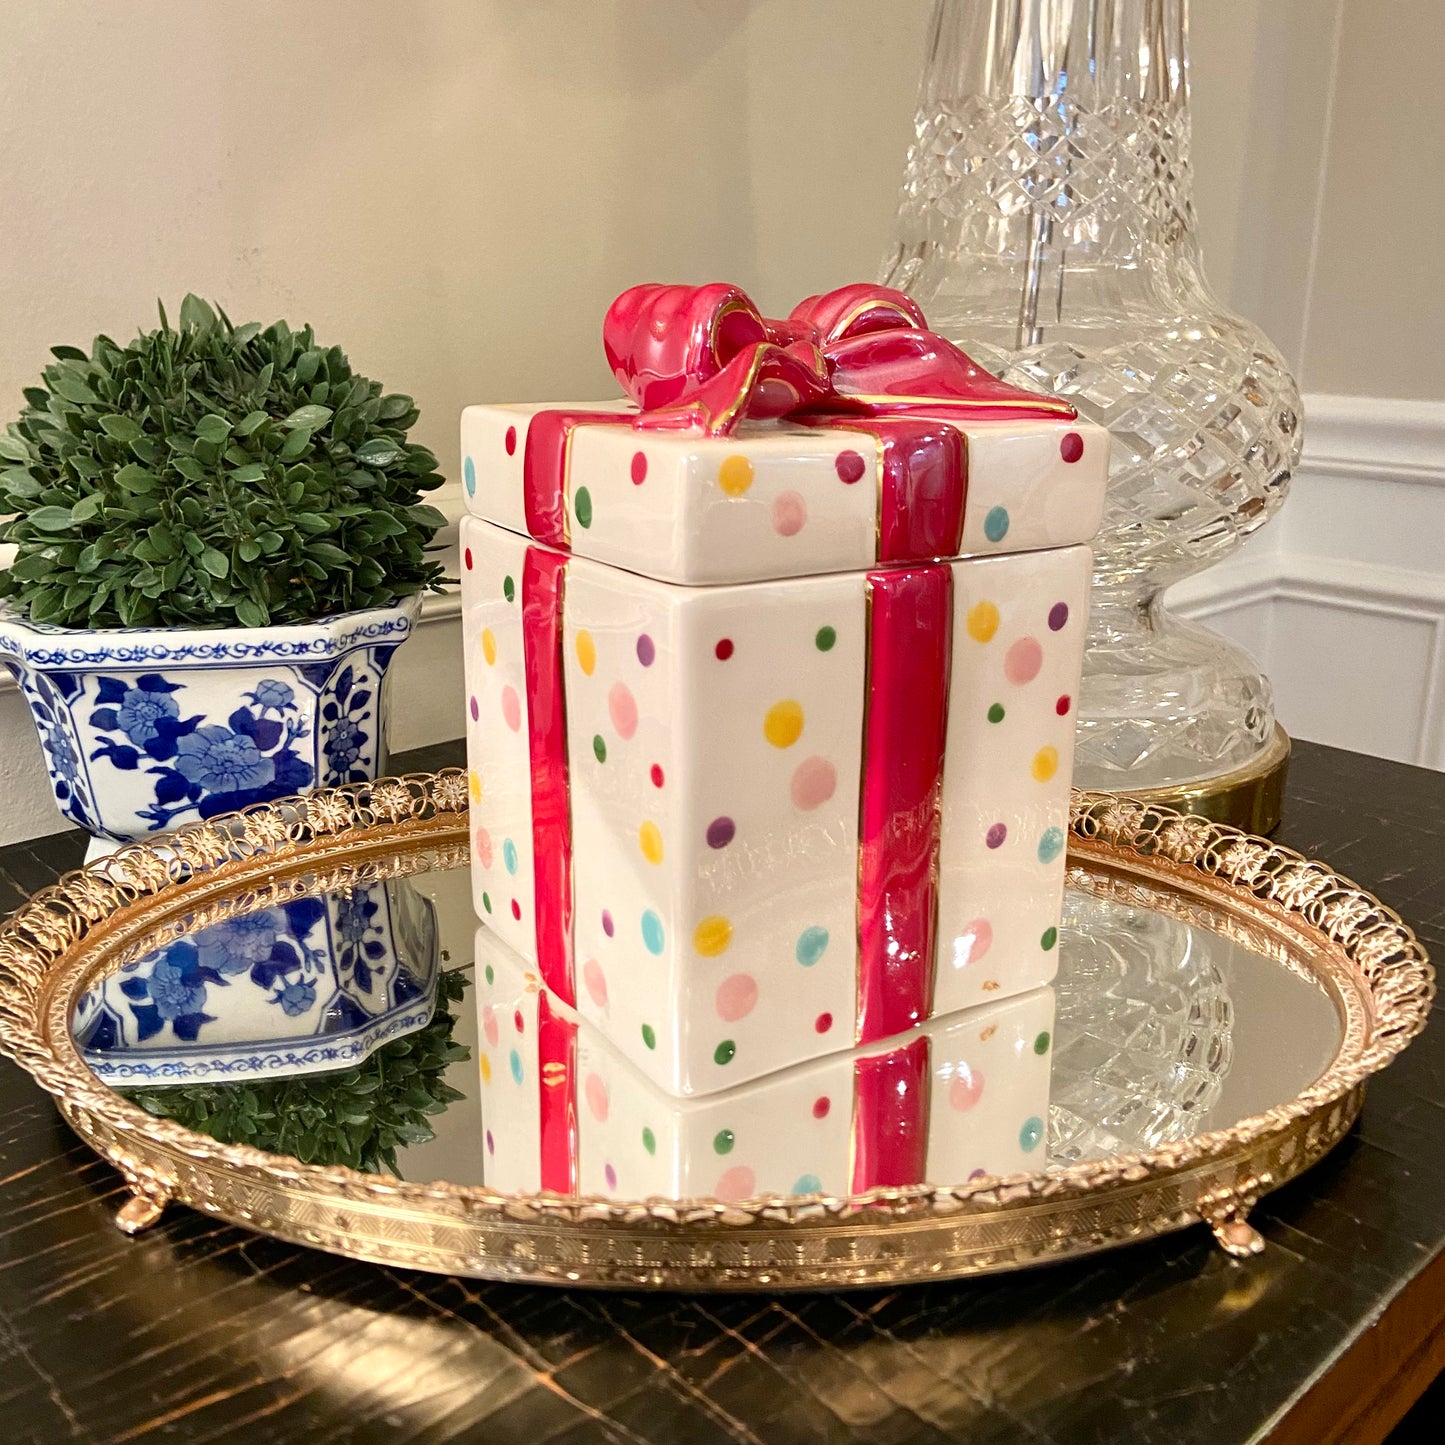 Whimsical polka dot & a bow lidded jar from Waterford